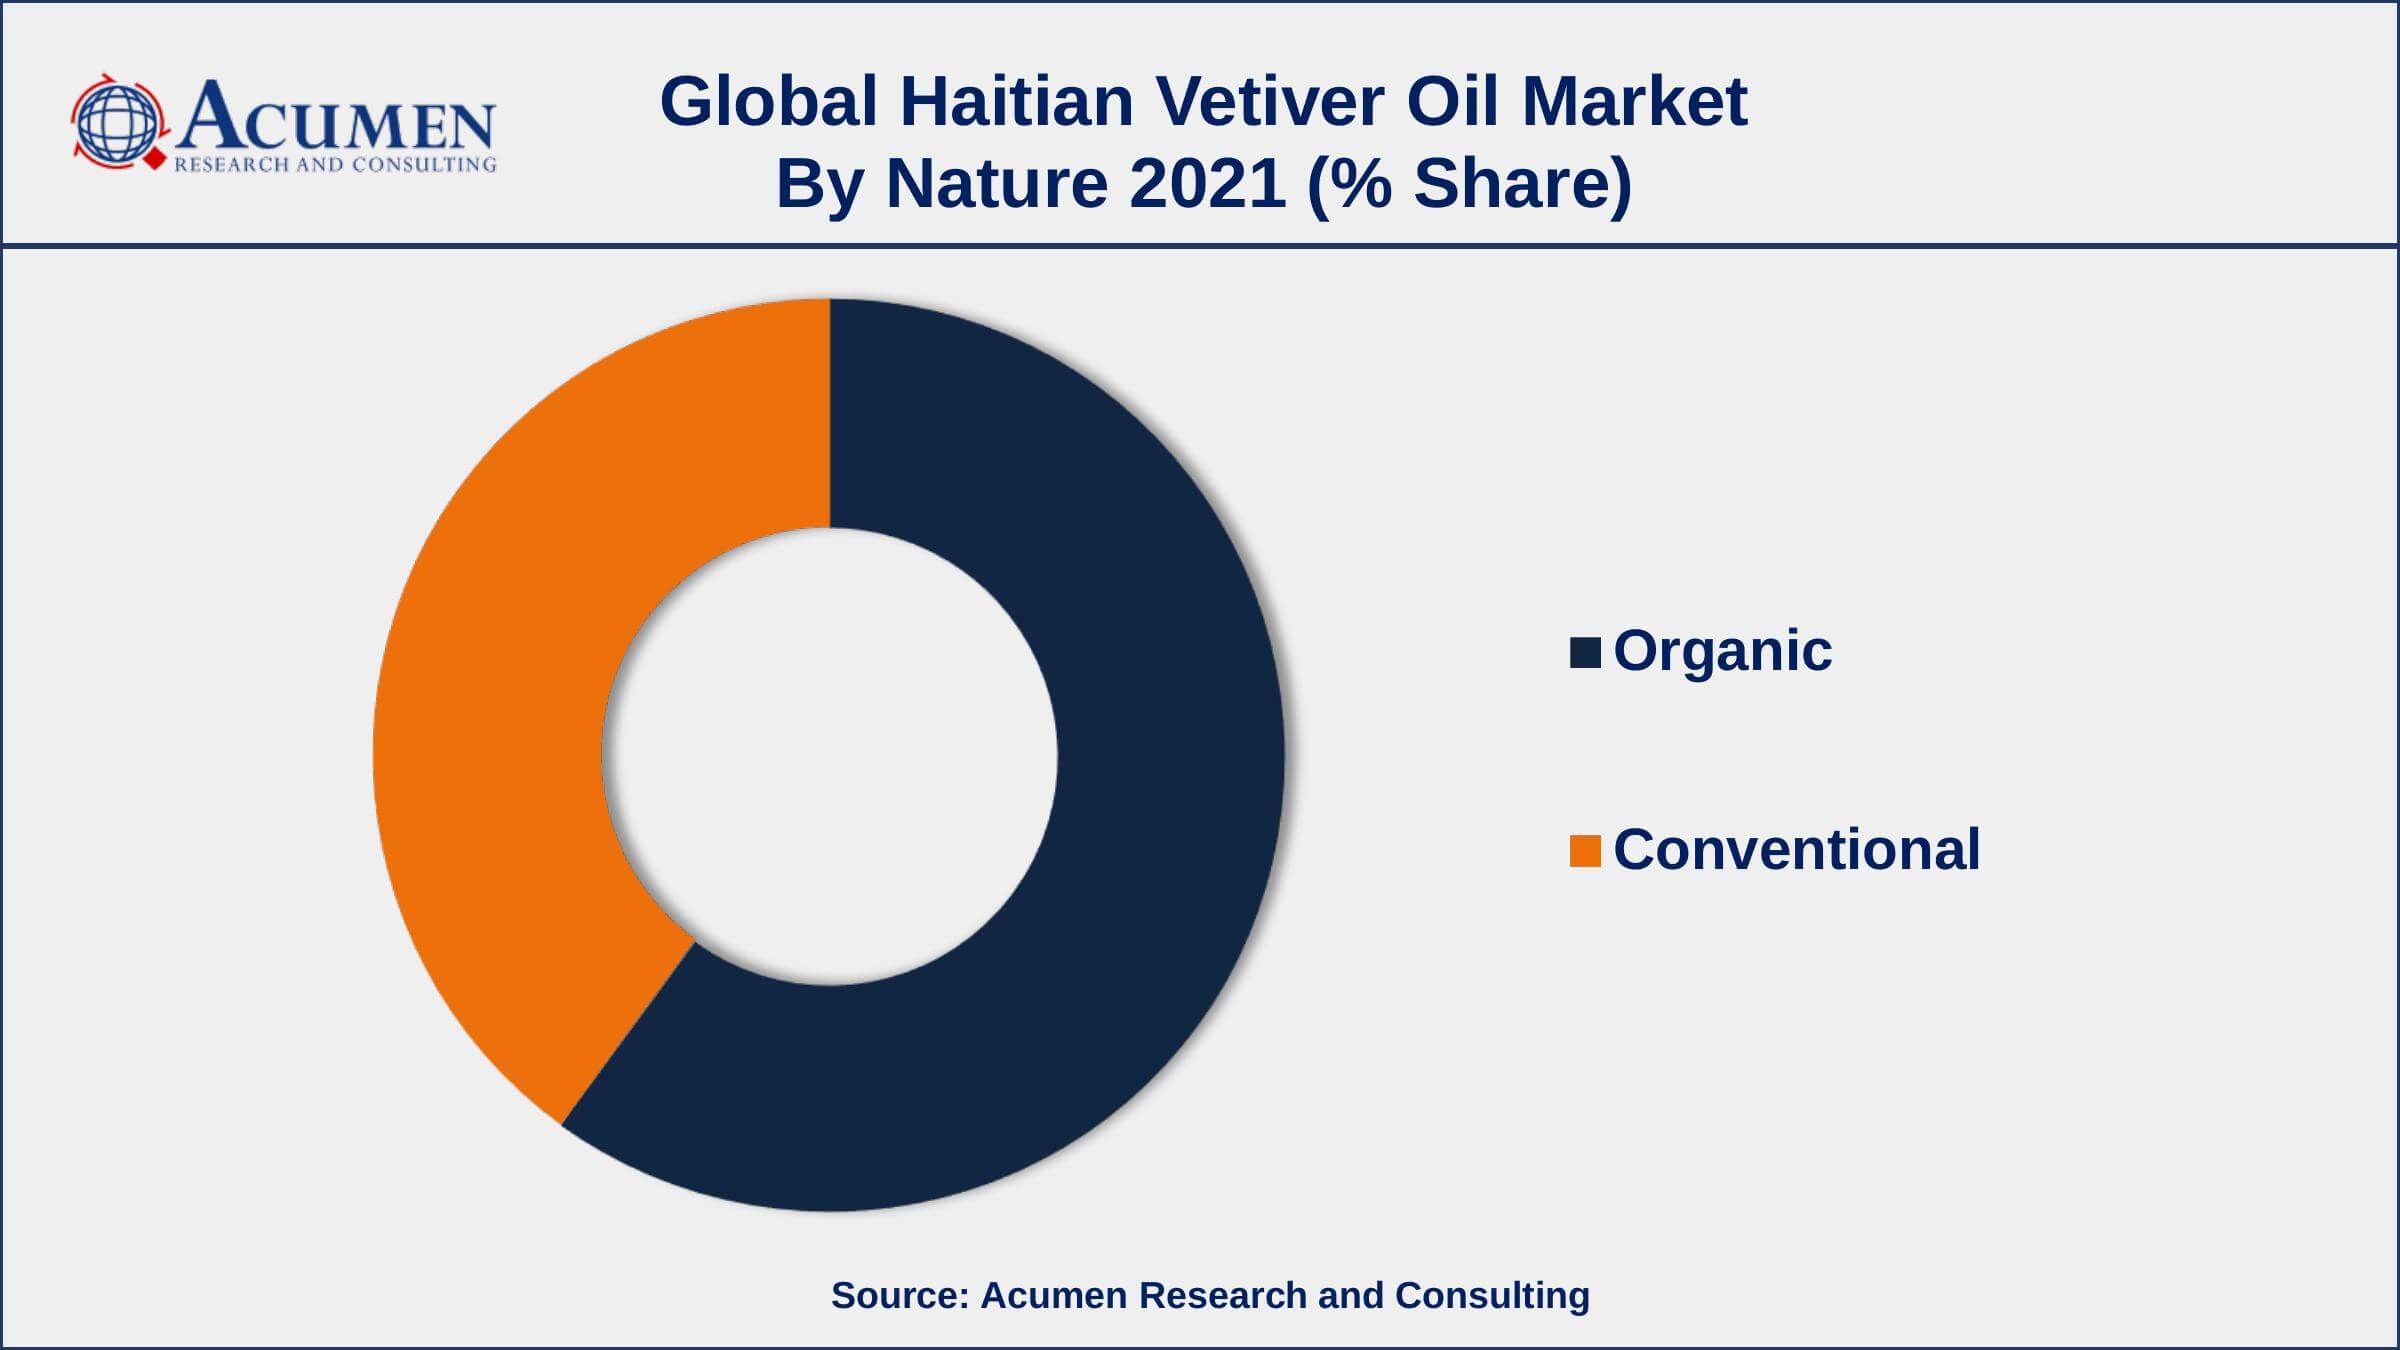 By nature, the organic segment has accounted market share of over 61% in 2021